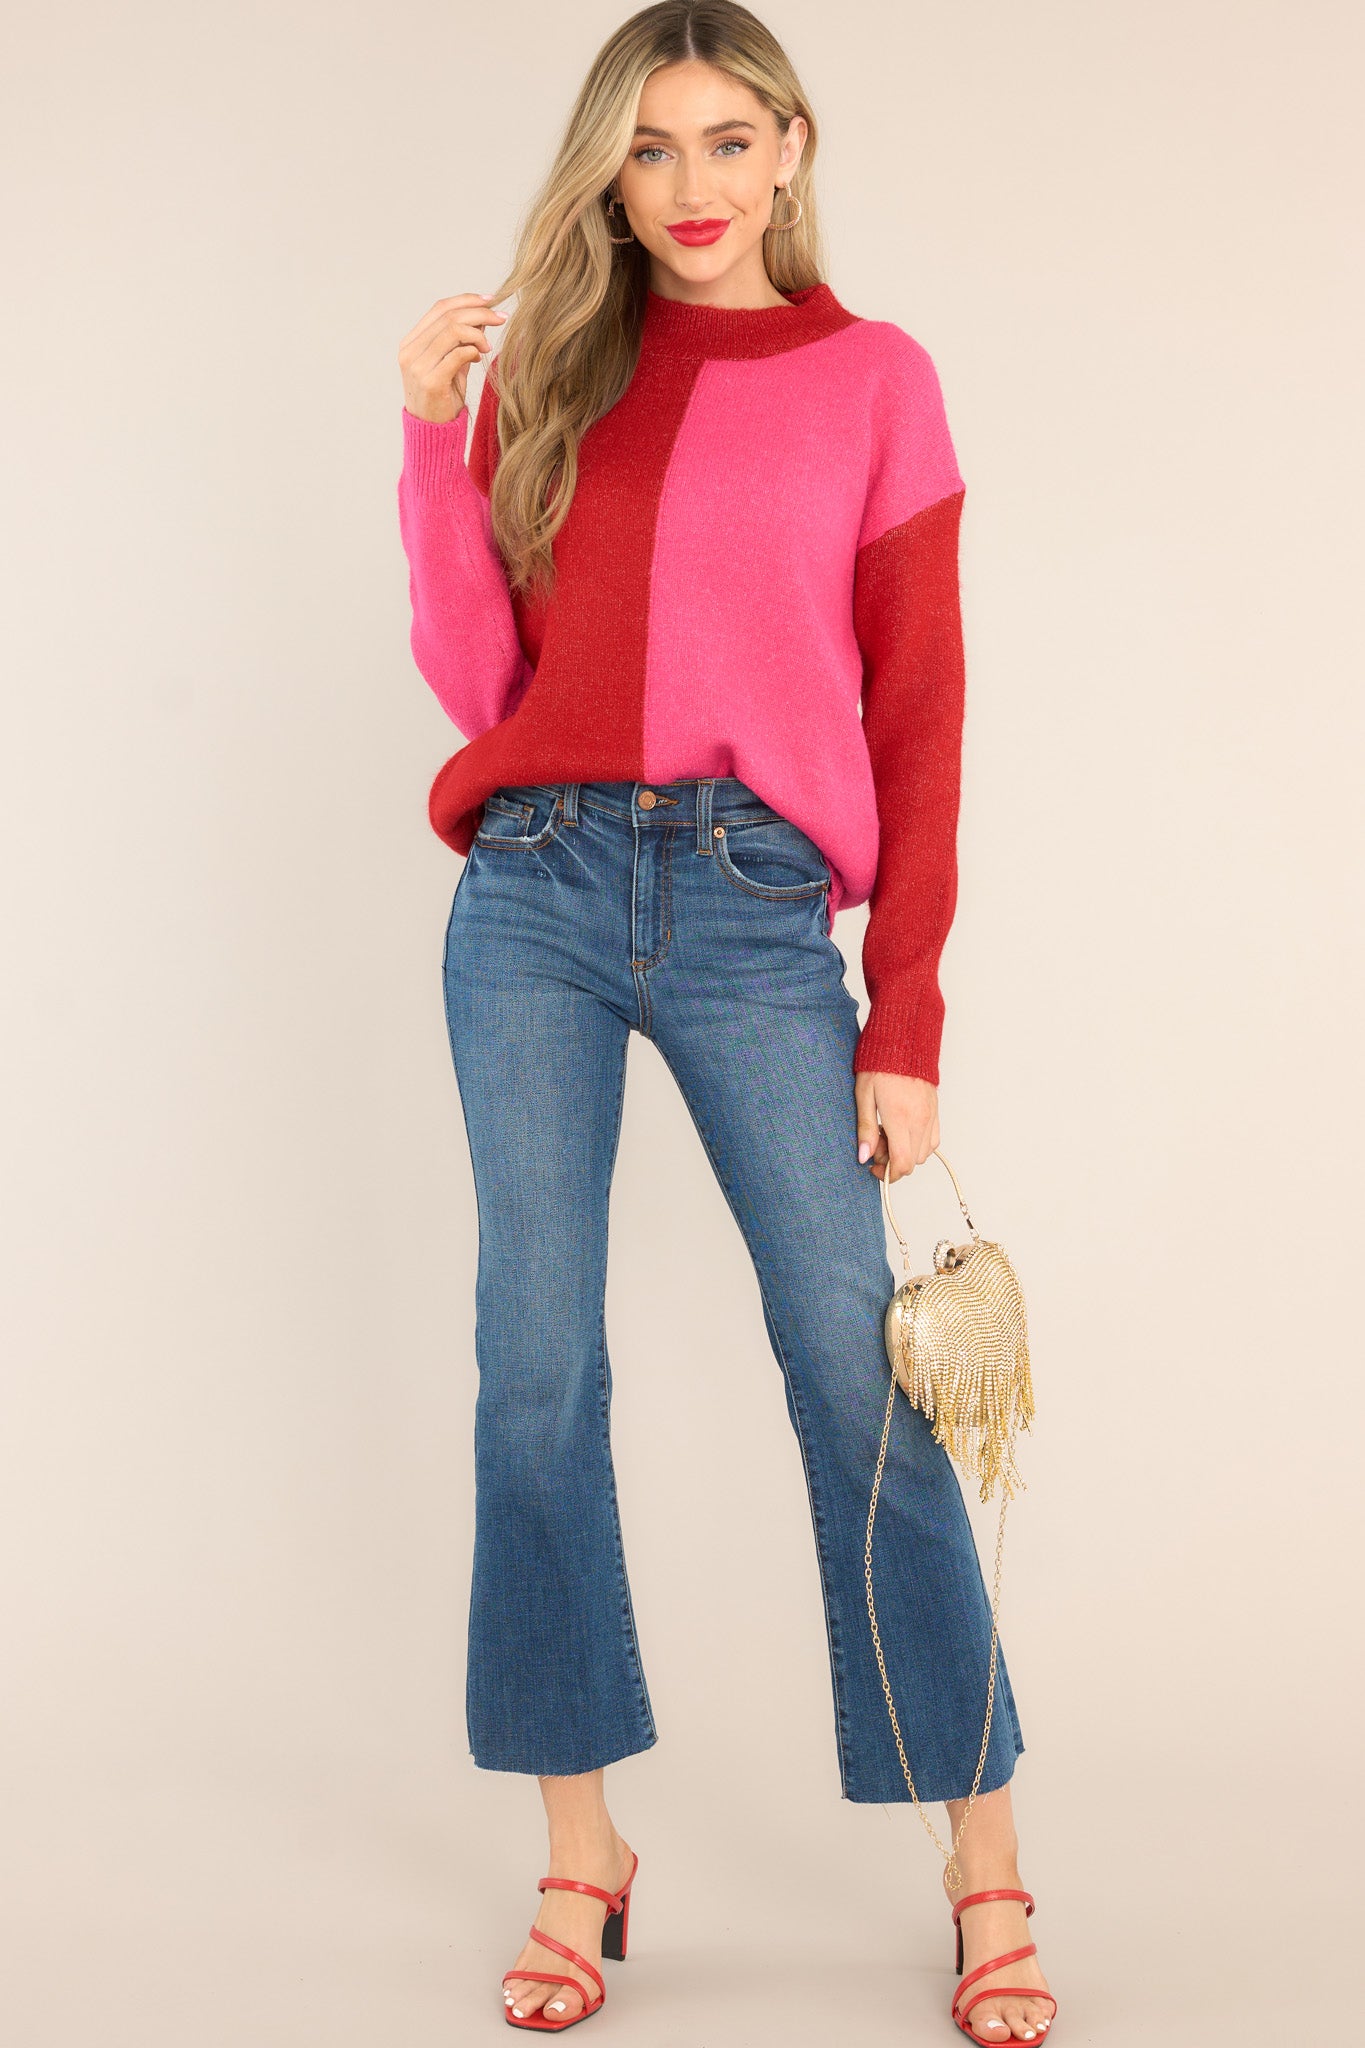 This hot pink and red sweater features a high neckline, a two toned color pattern, and cuffed long sleeves.